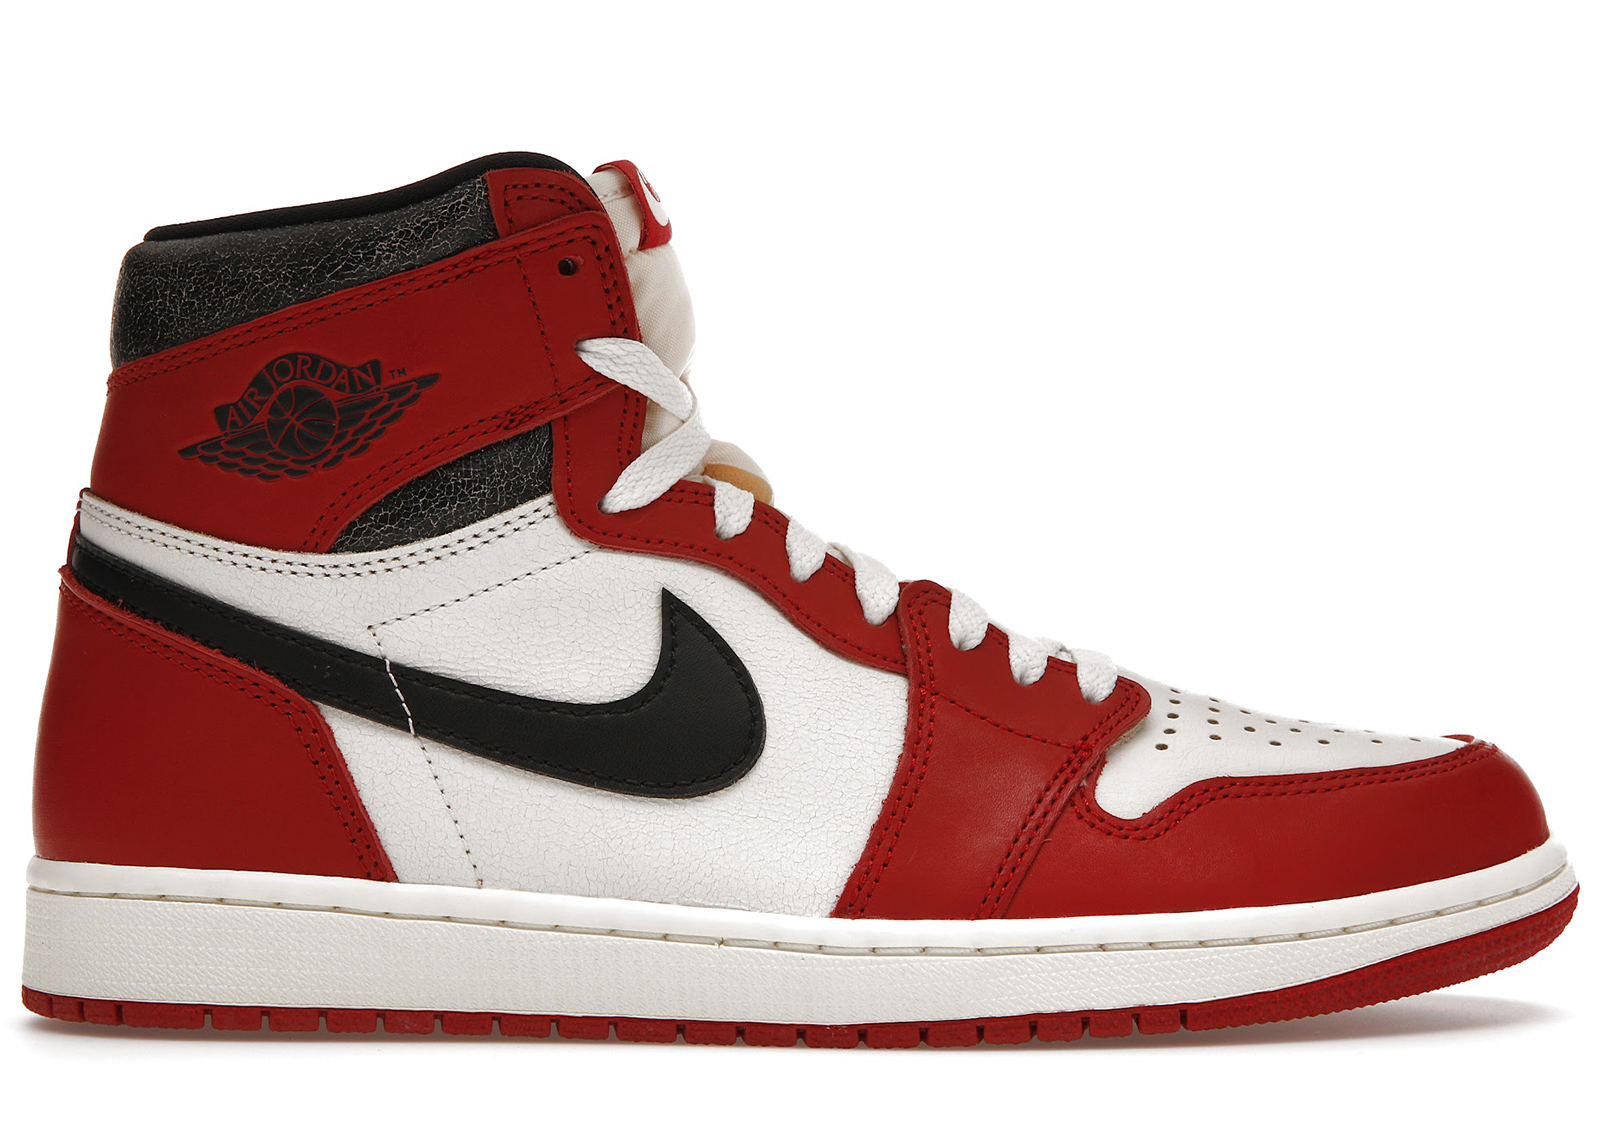 Air Jordan 1 Chicago lost and found | eclipseseal.com